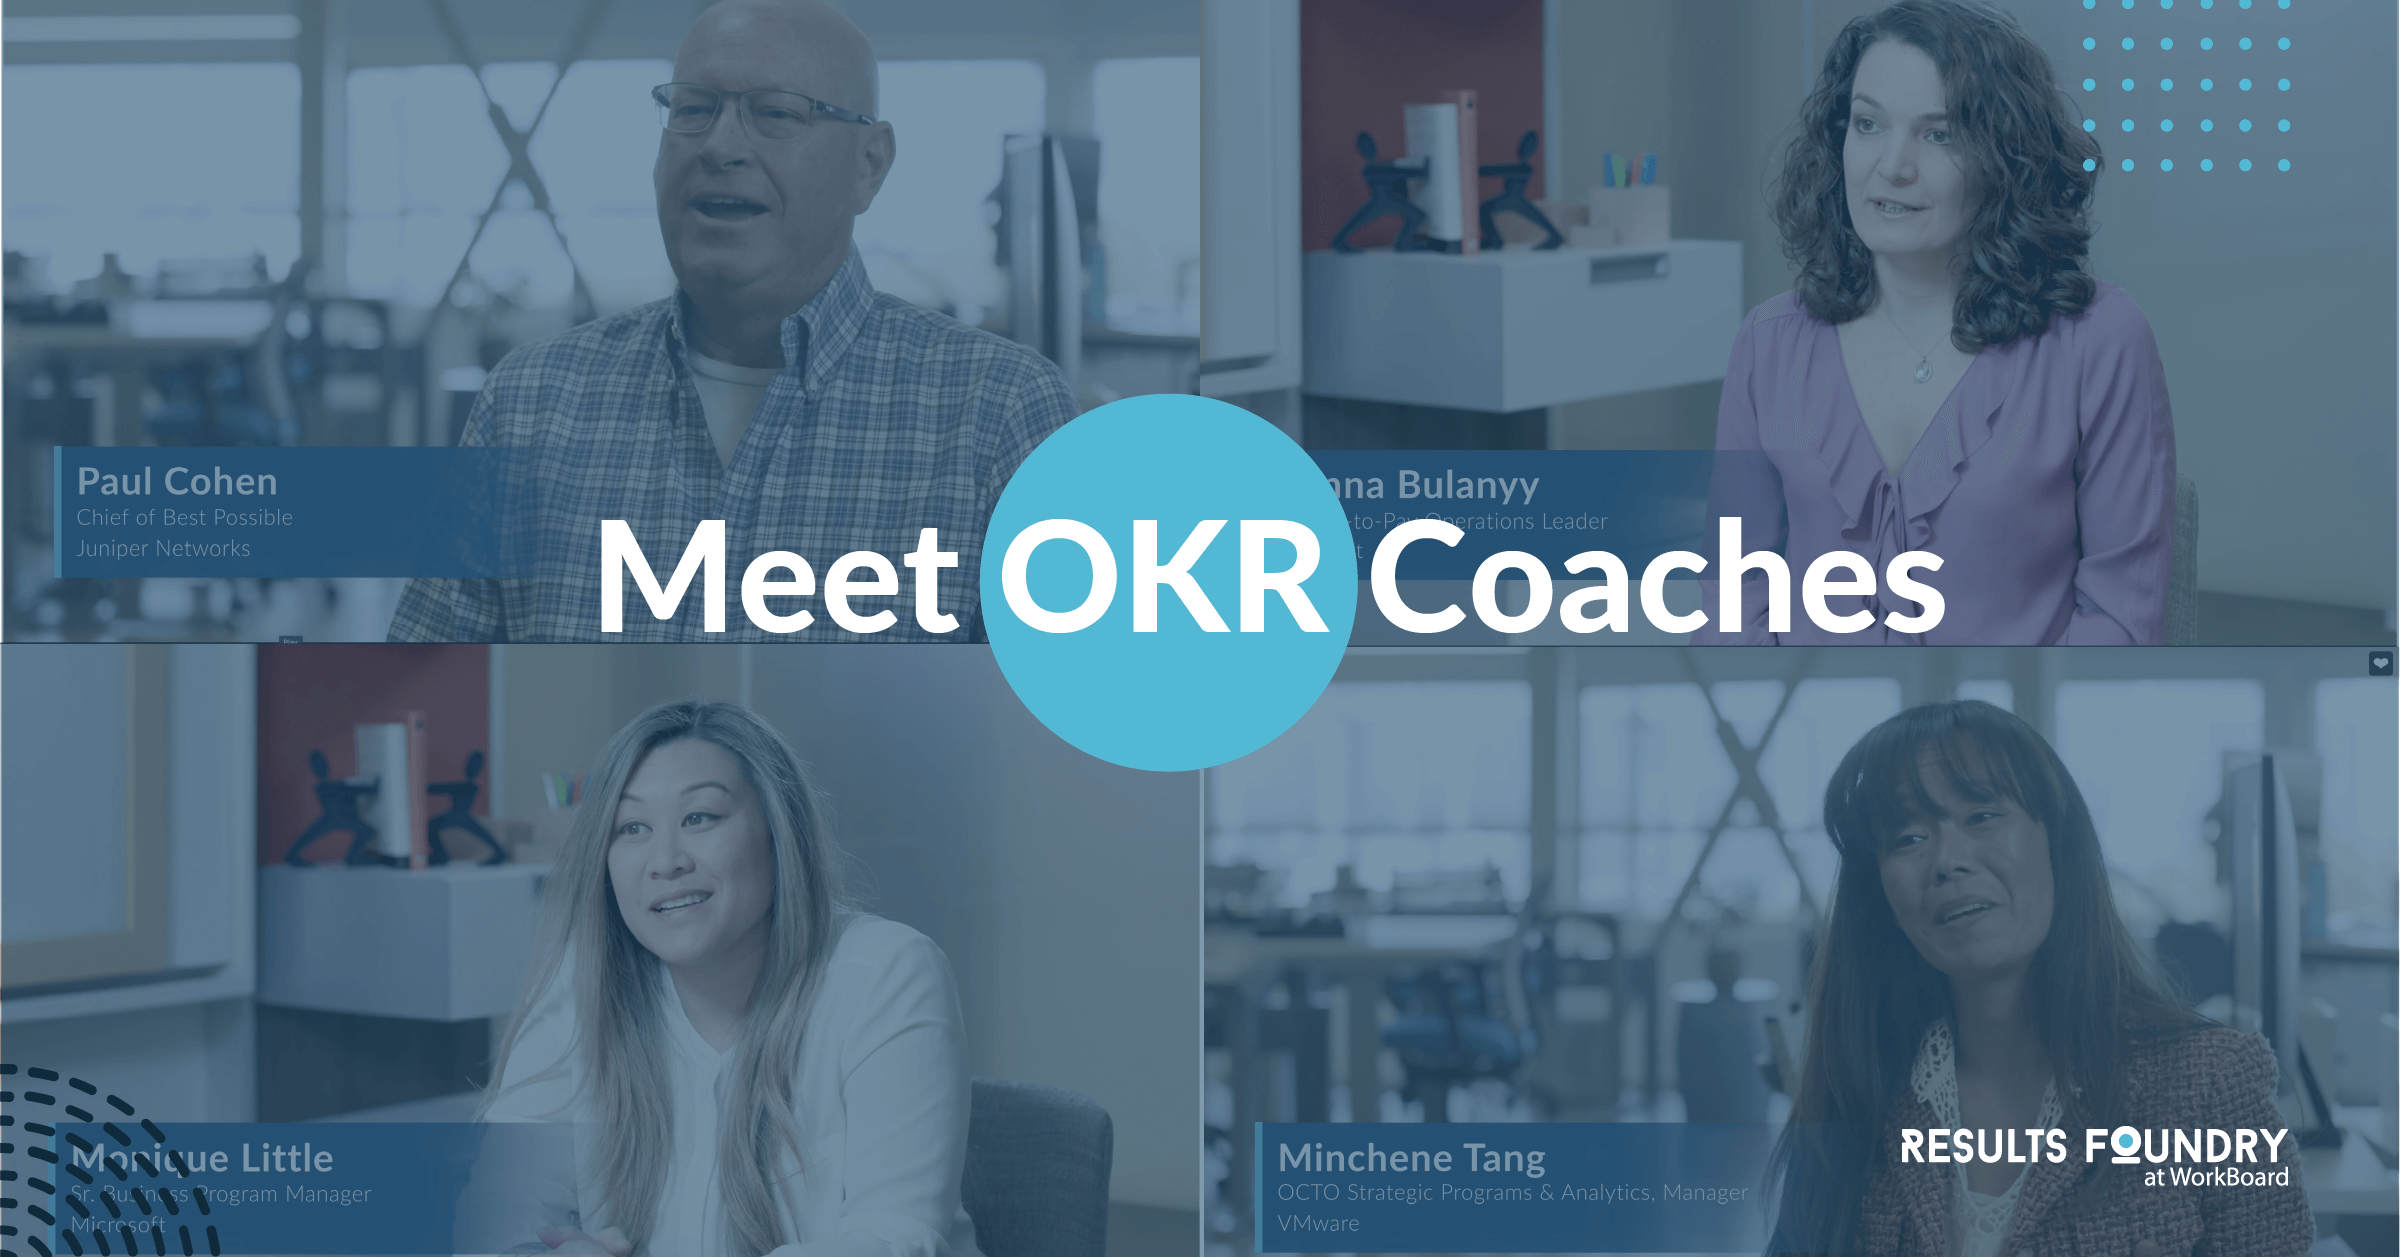 Why Become a Certified OKR Coach?